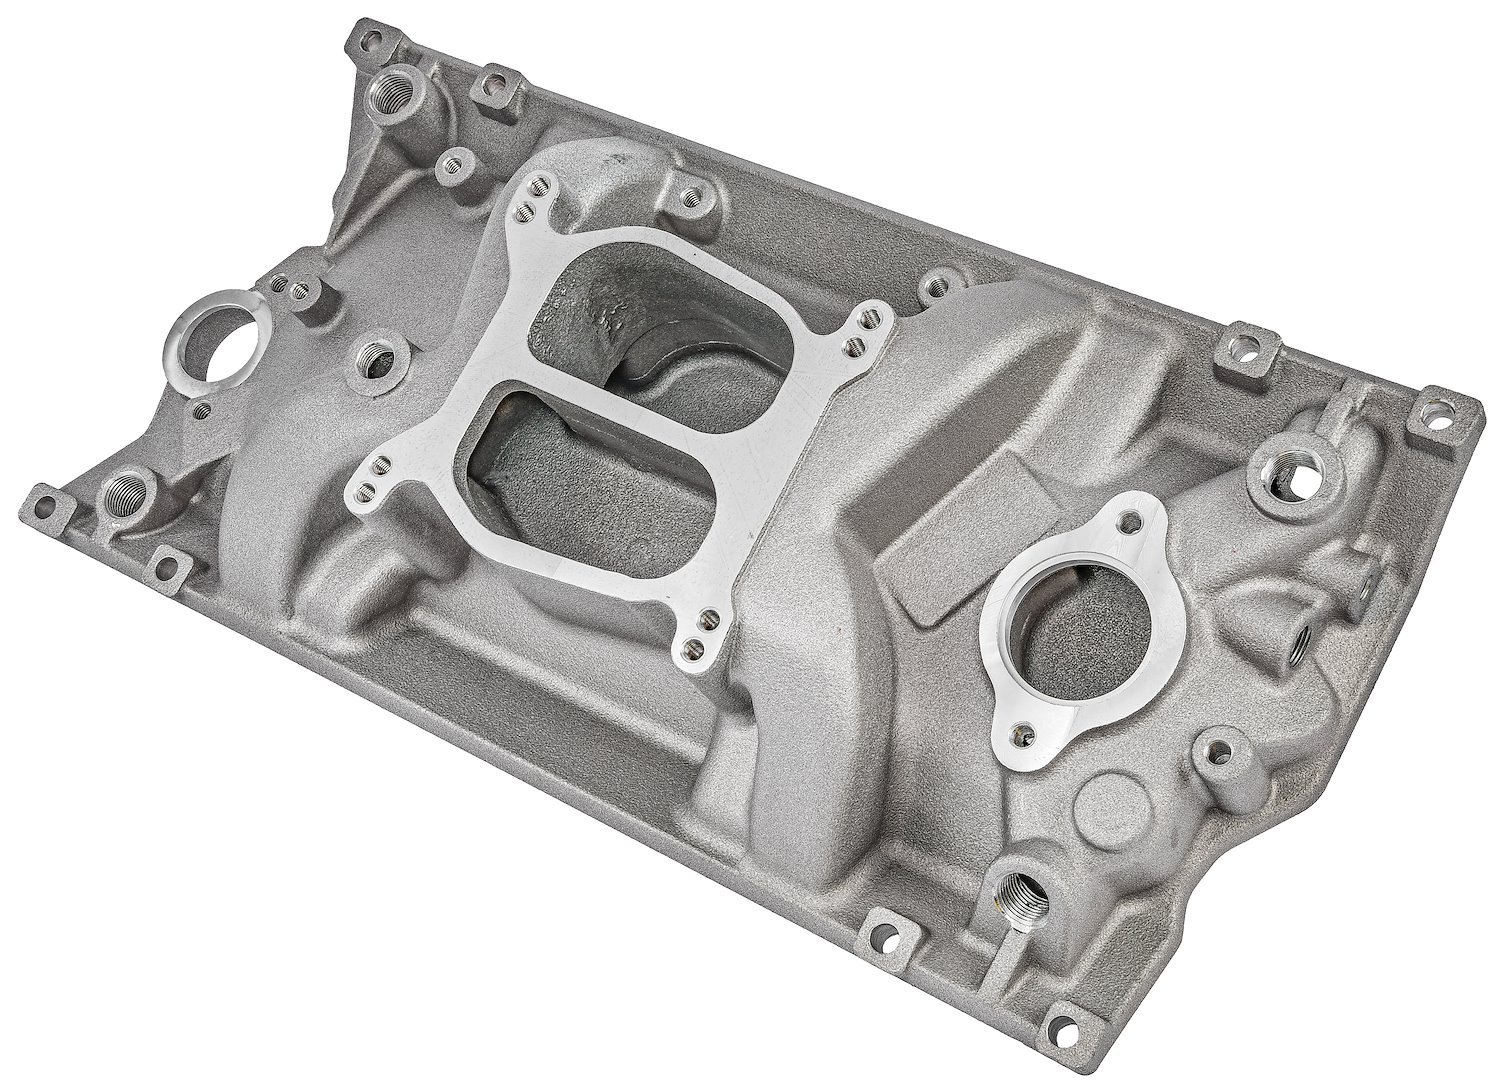 Intake Manifold for 1996-2002 Small Block Chevy 350 Vortec, Dual Plane [Natural]